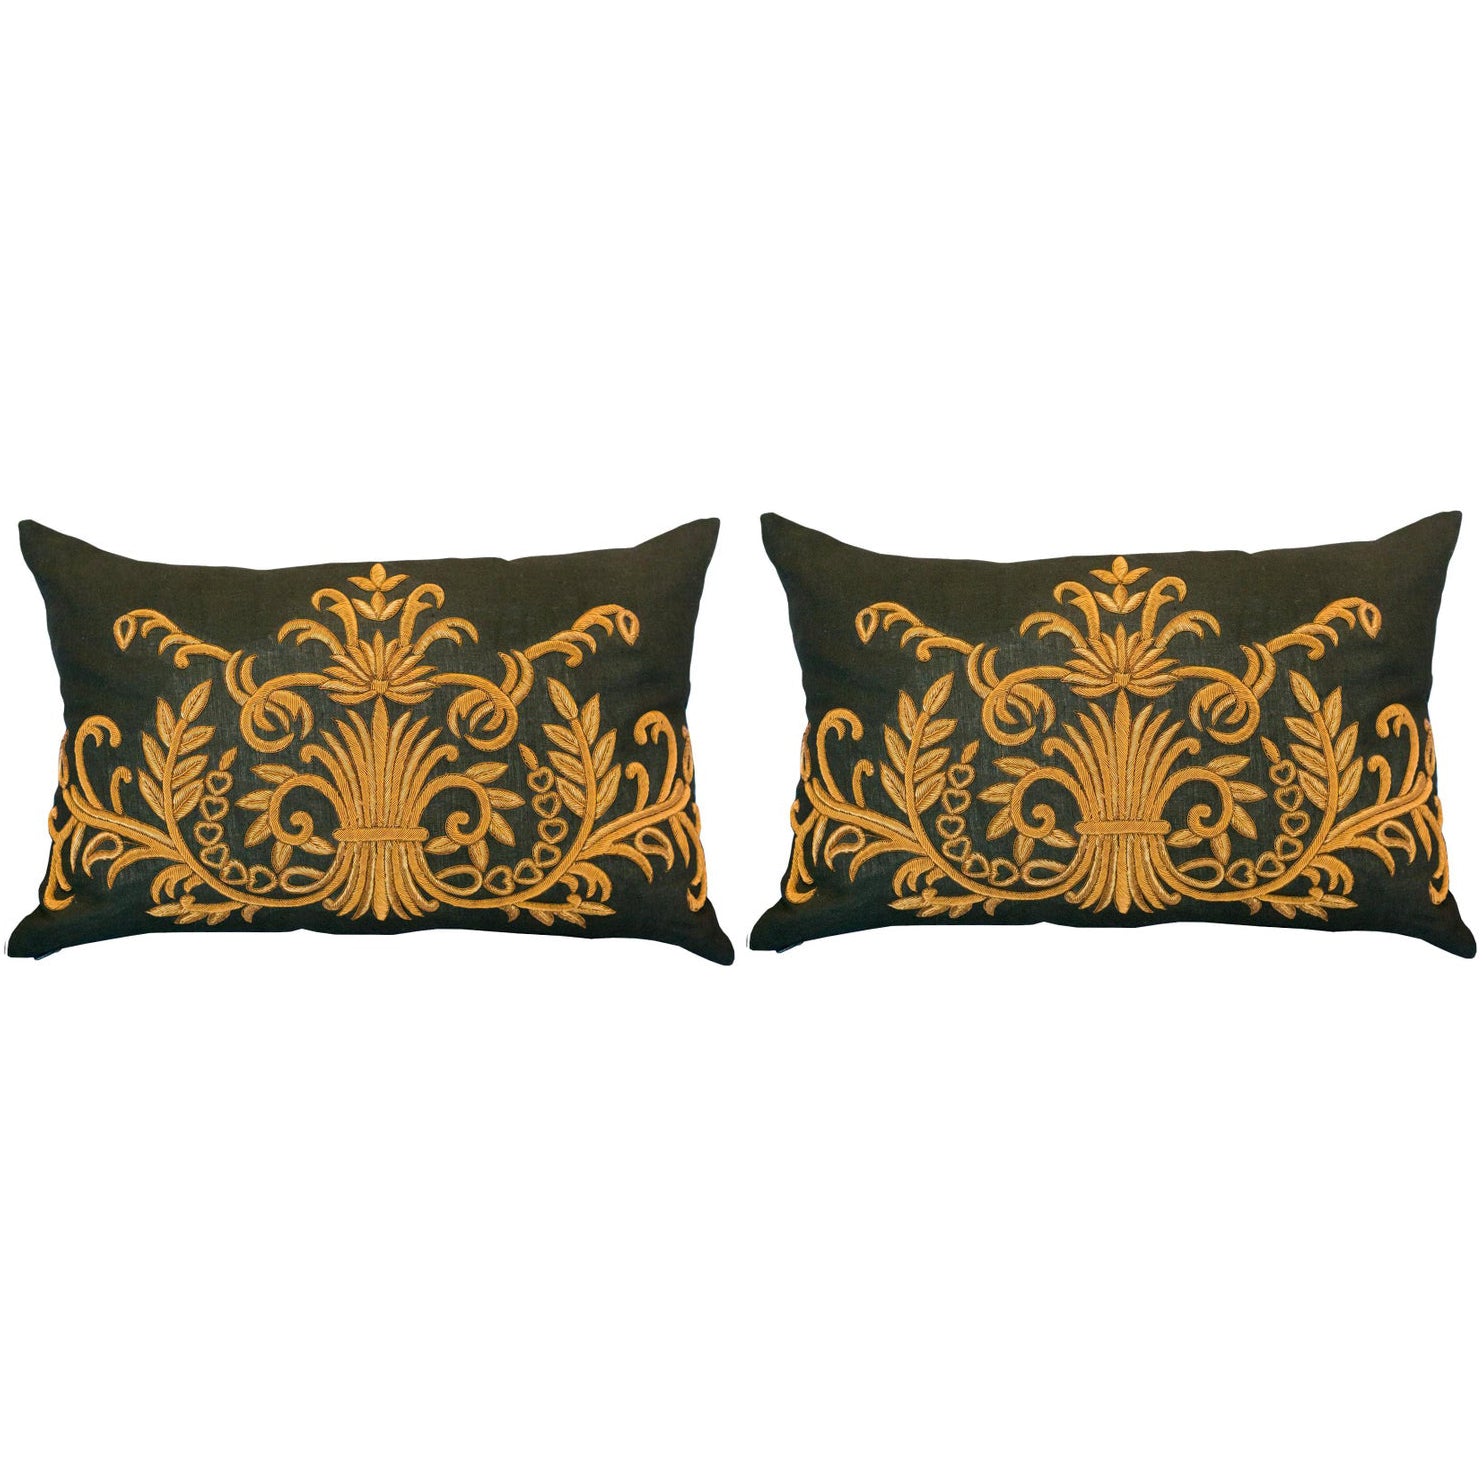 PAIR OF EMBROIDERED METALLIC PILLOWS ON LINEN